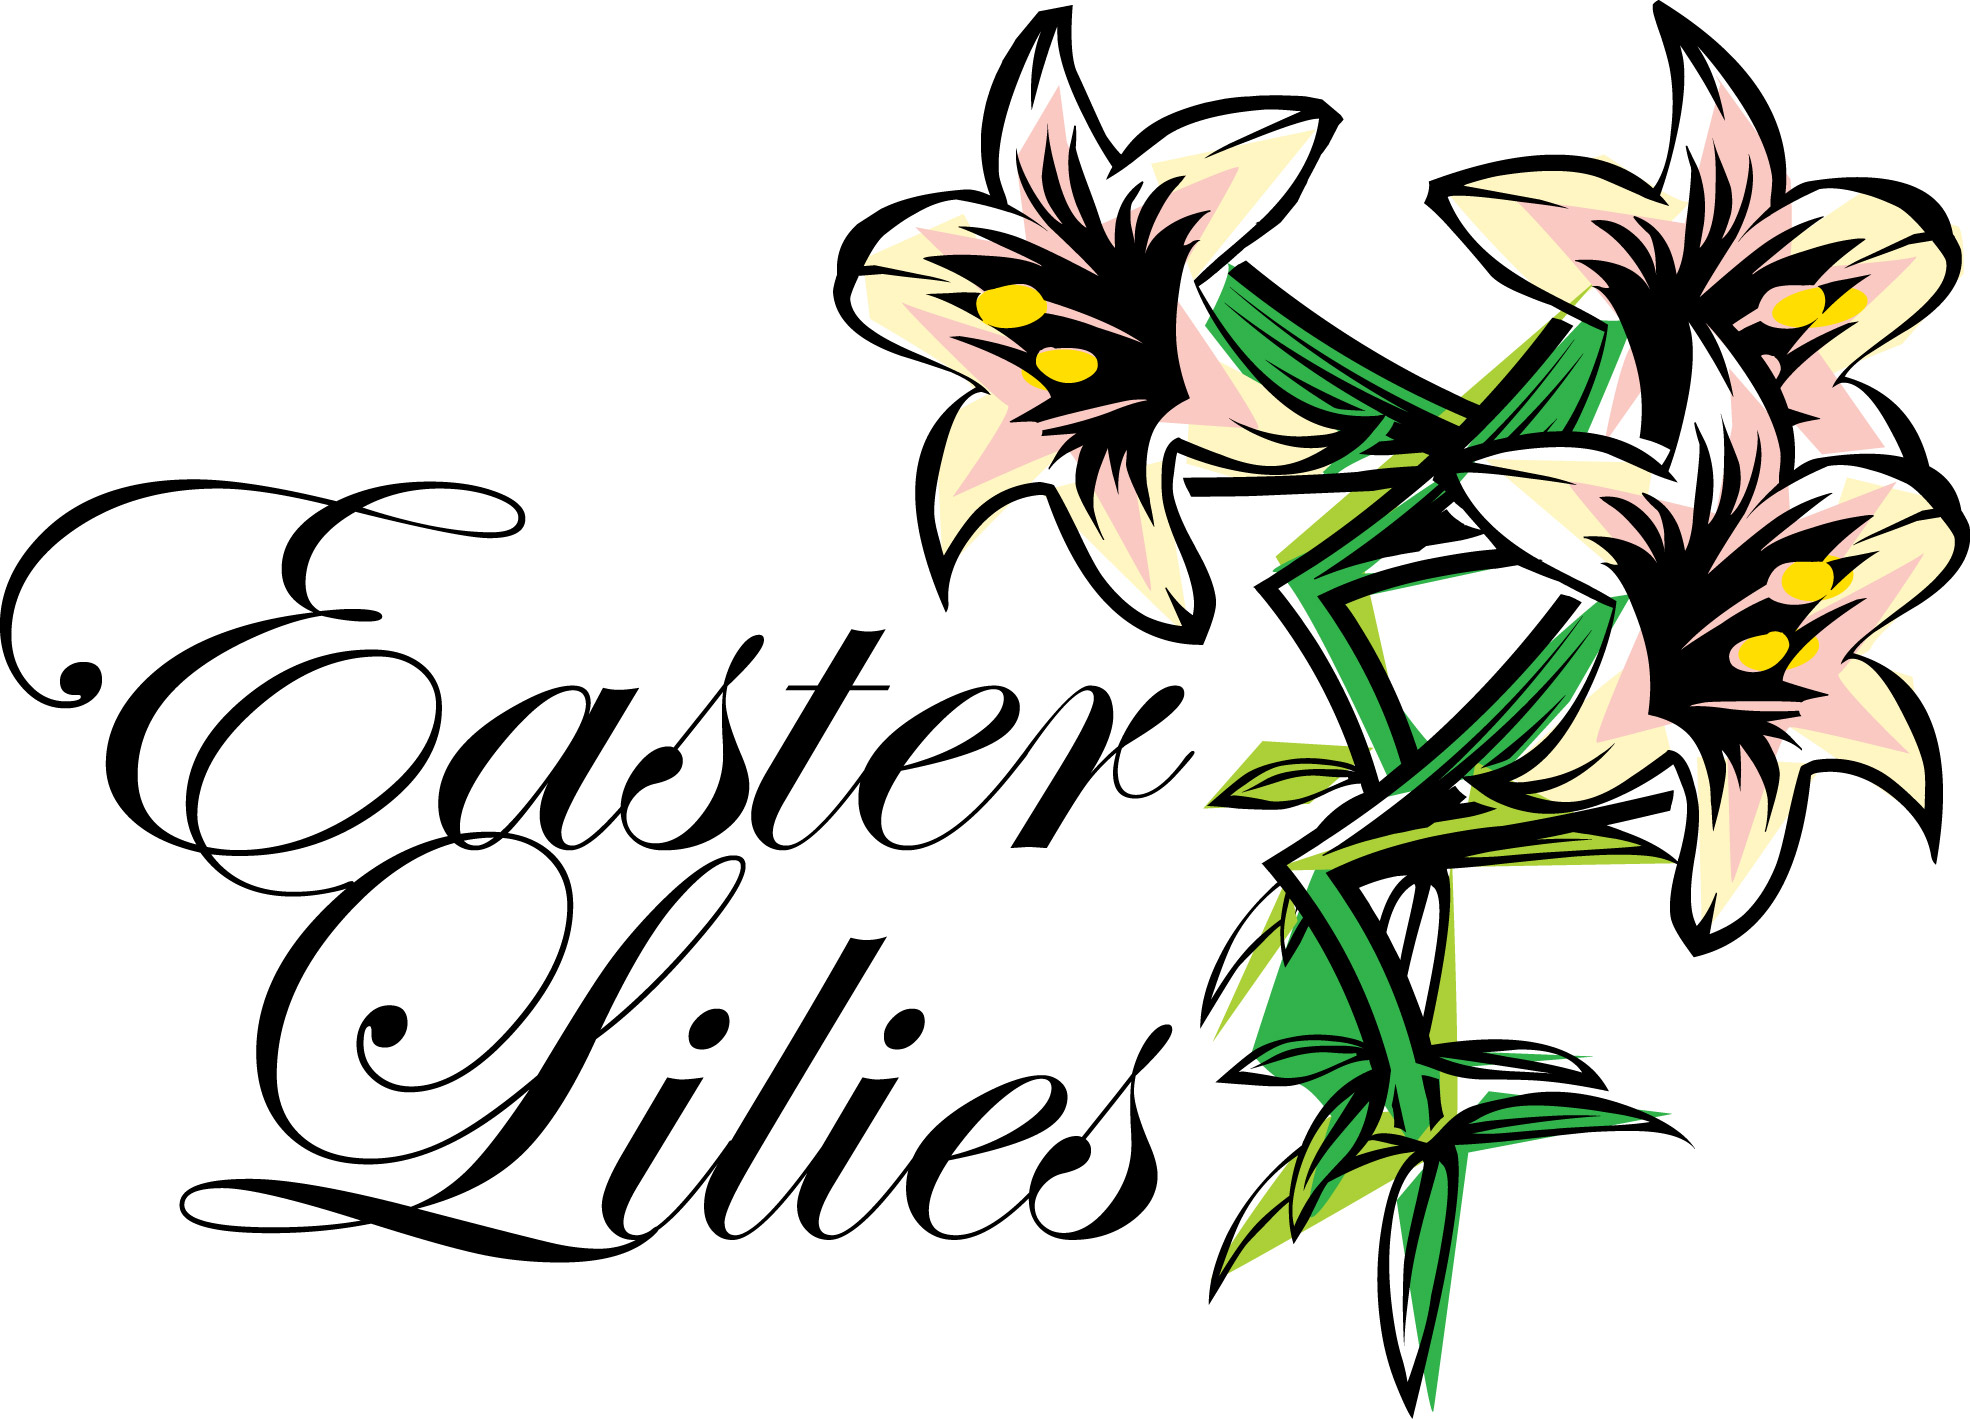 Easter Lily Clip Art 